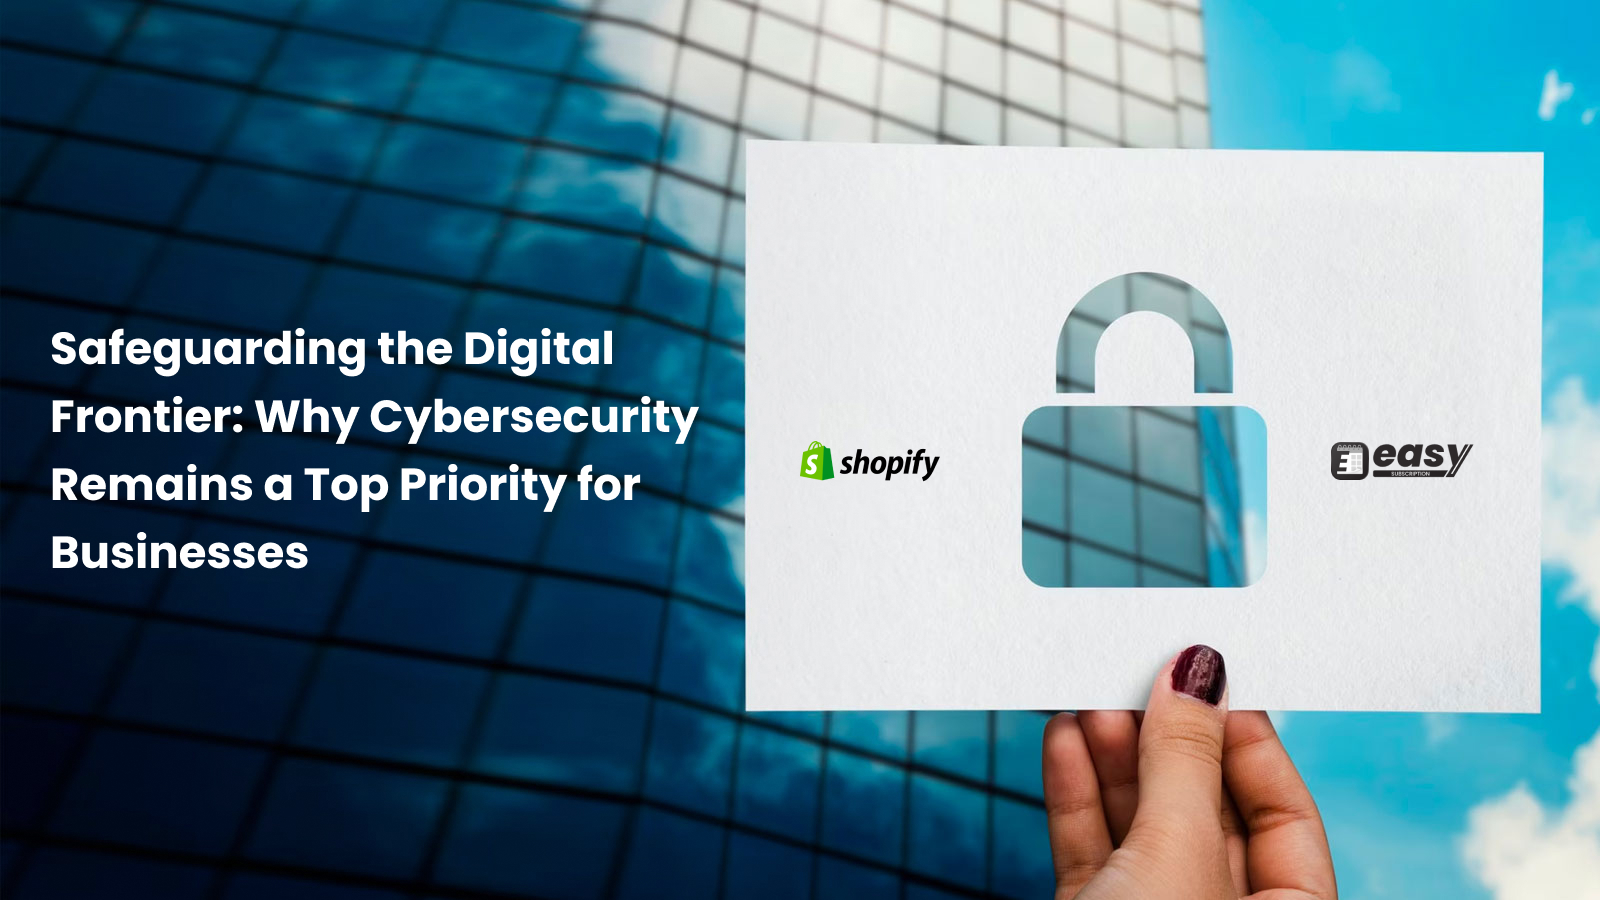 Safeguarding the Digital Frontier_ Why Cybersecurity Remains a Top Priority for Businesses